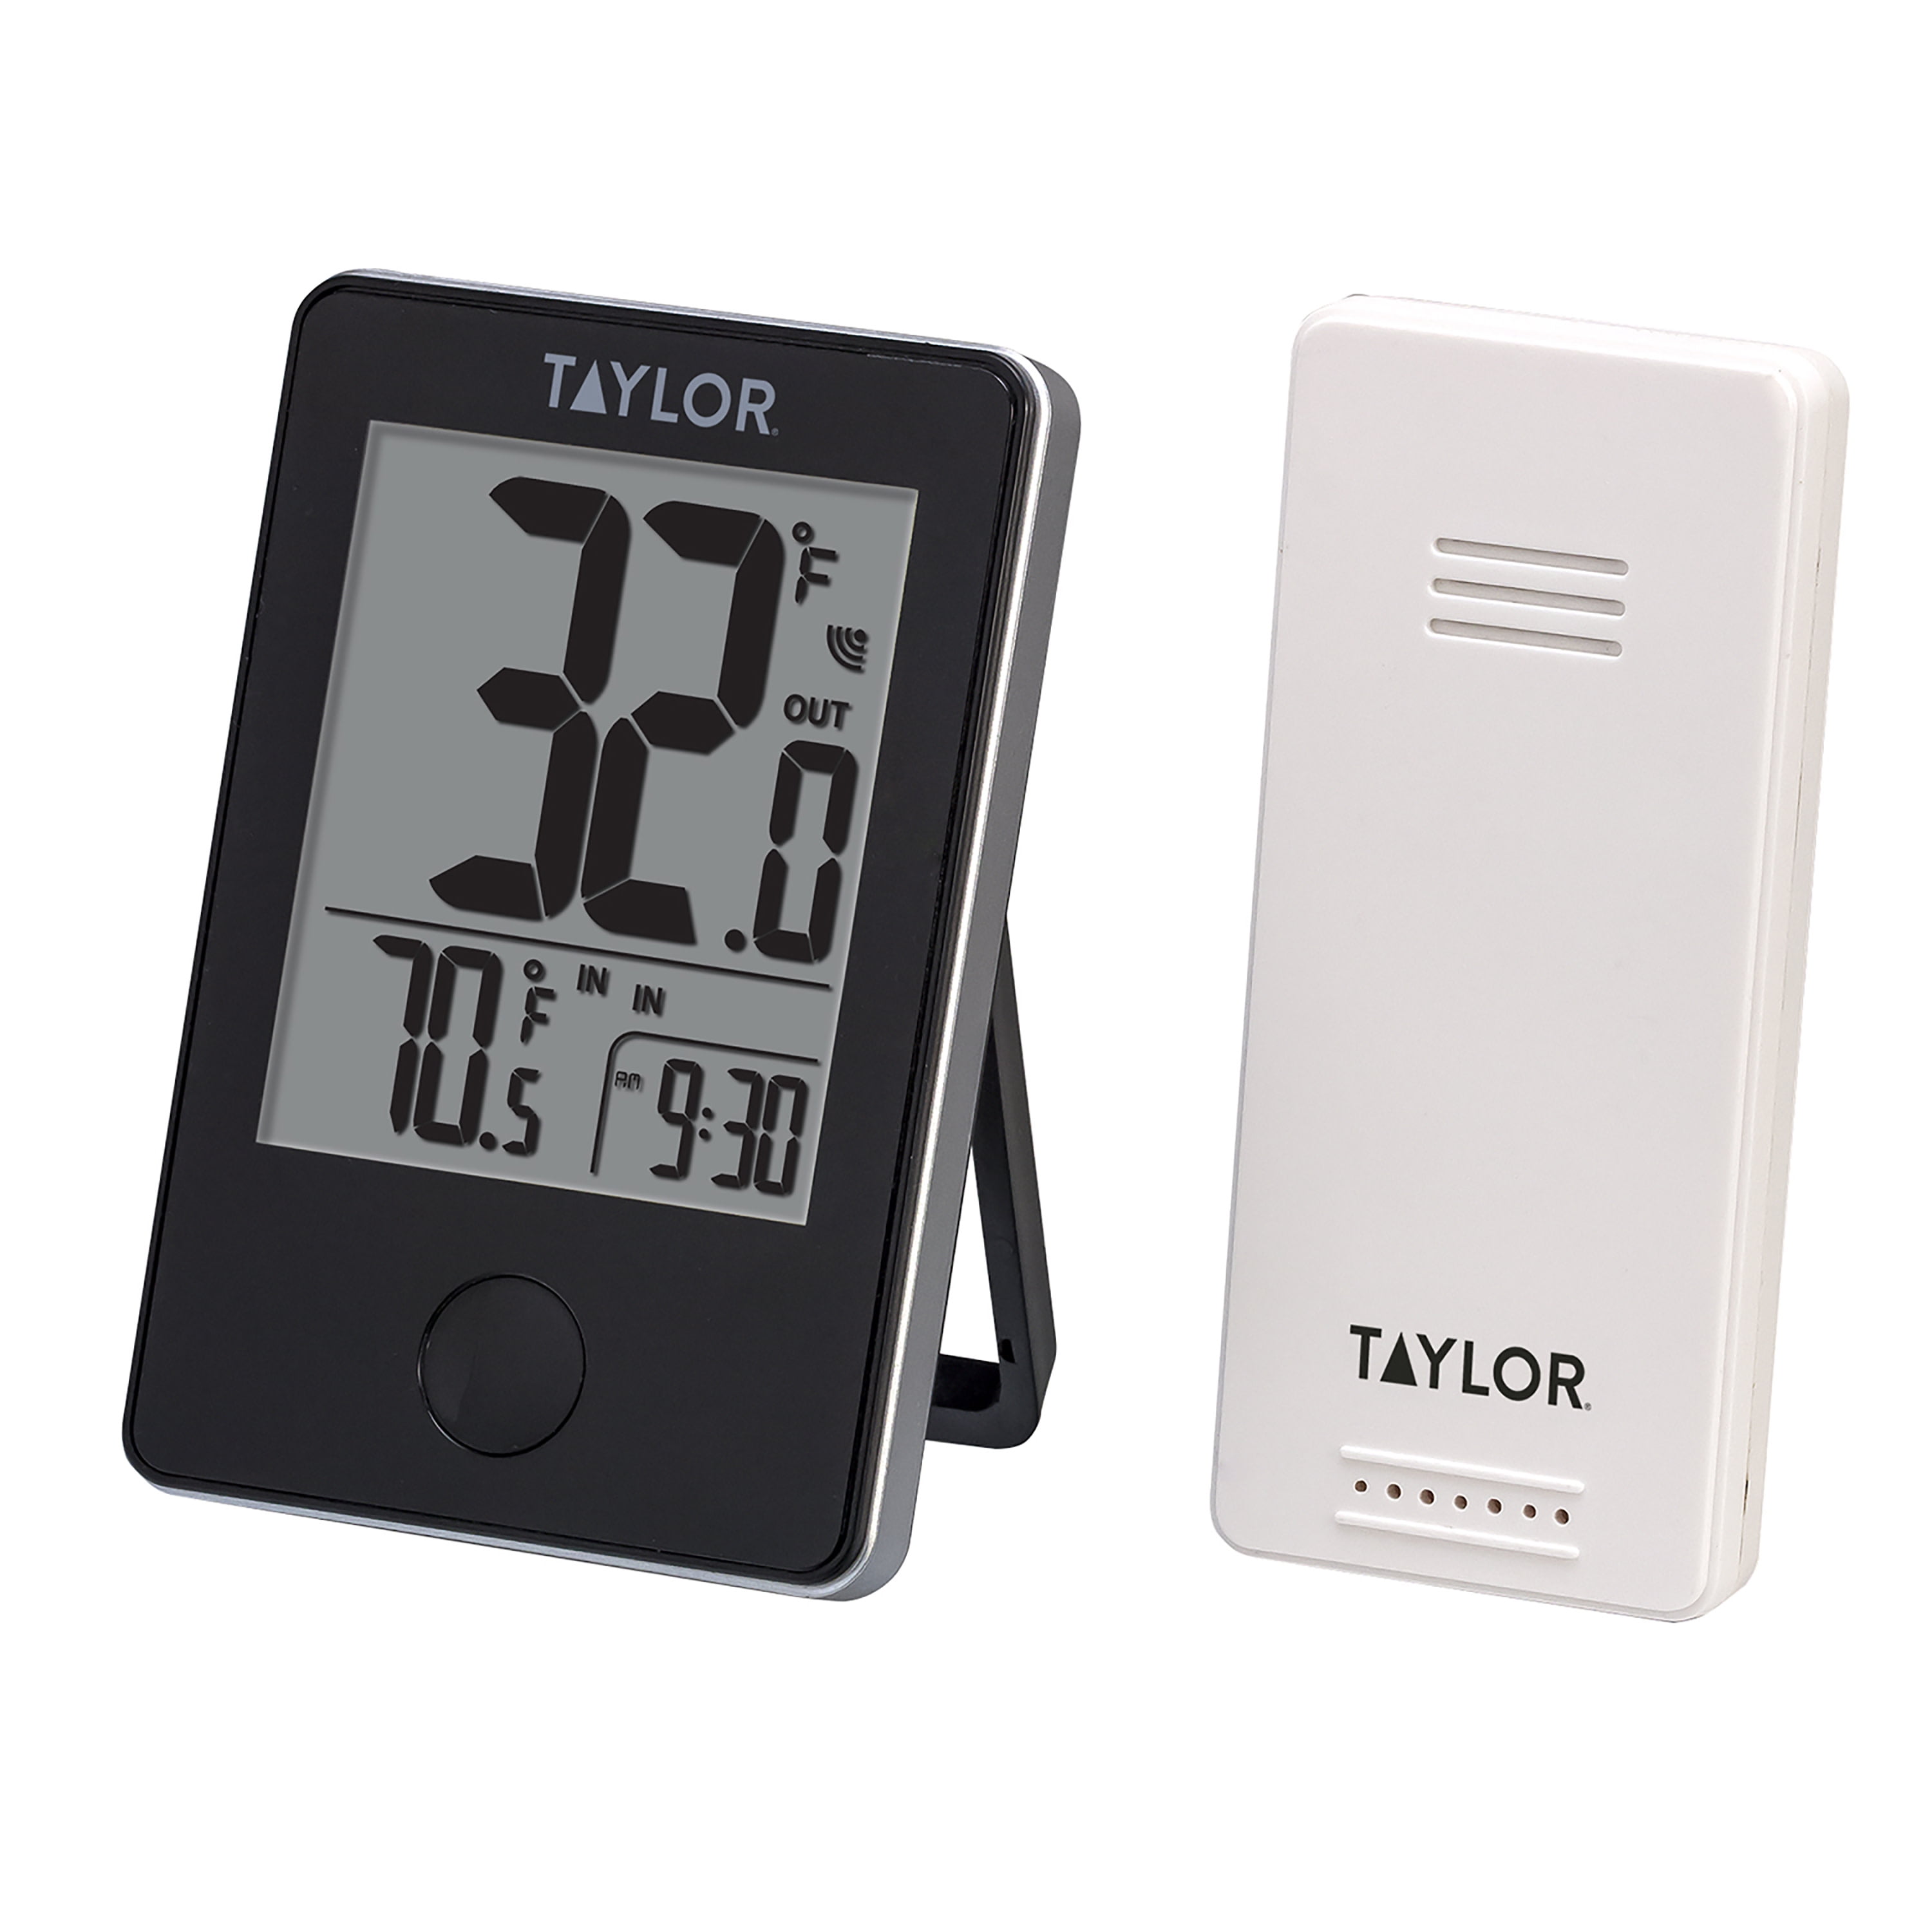 Taylor Wired Digital Indoor/Outdoor Thermometer